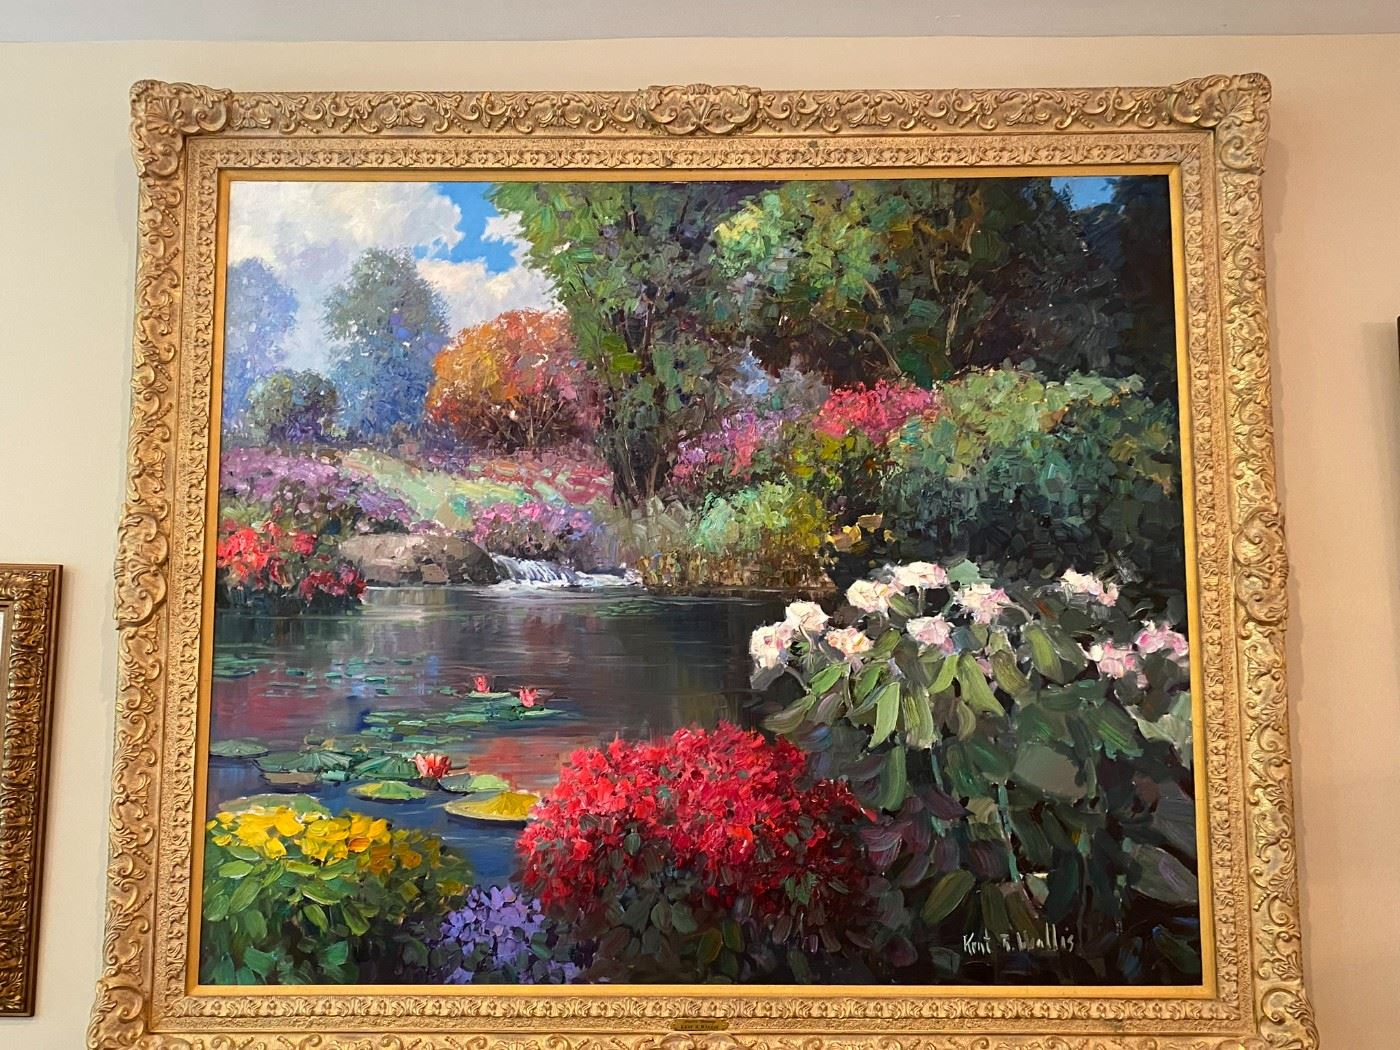 Oil on Canvas, "Garden Hideaway" by Kent R. Wallis. Commanding giltwood and composition frame with a foliate design. Scene of tranquil pond featuring water lilies, flowering bushes, and a small waterfall in the background. Provenance: purchased directly from the artist.